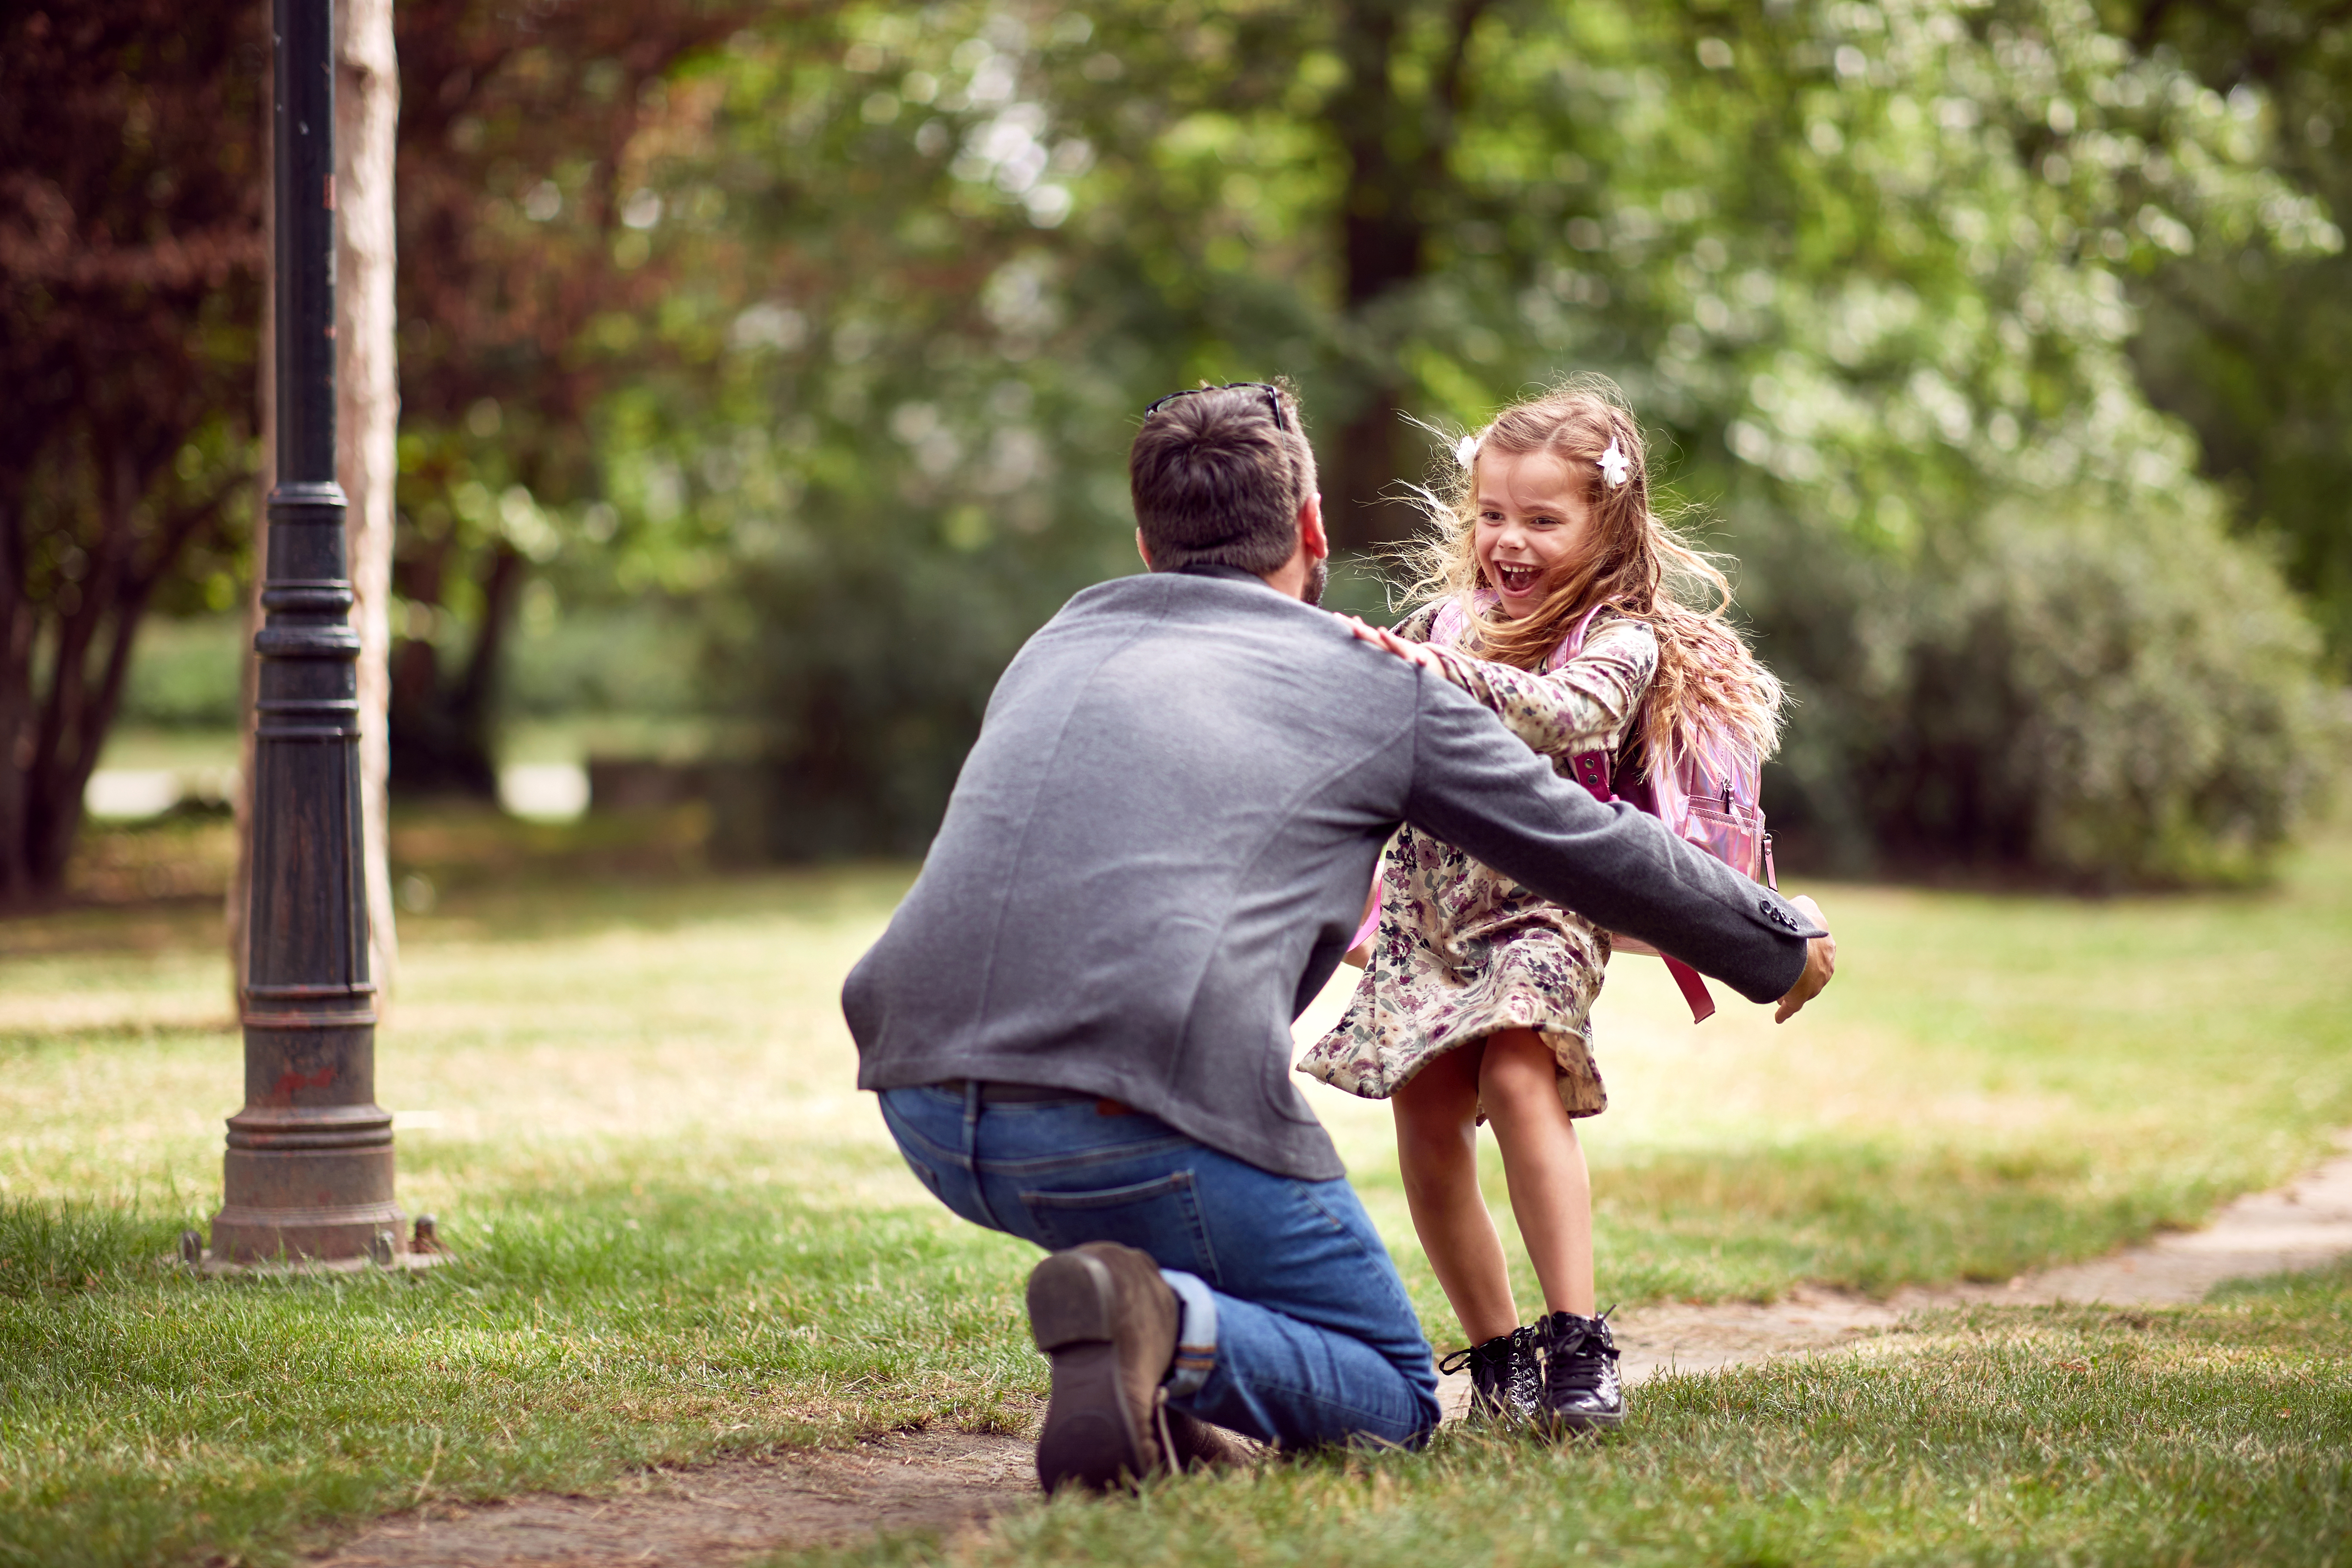 Man playing with a little girl in a park | Source: Shutterstock